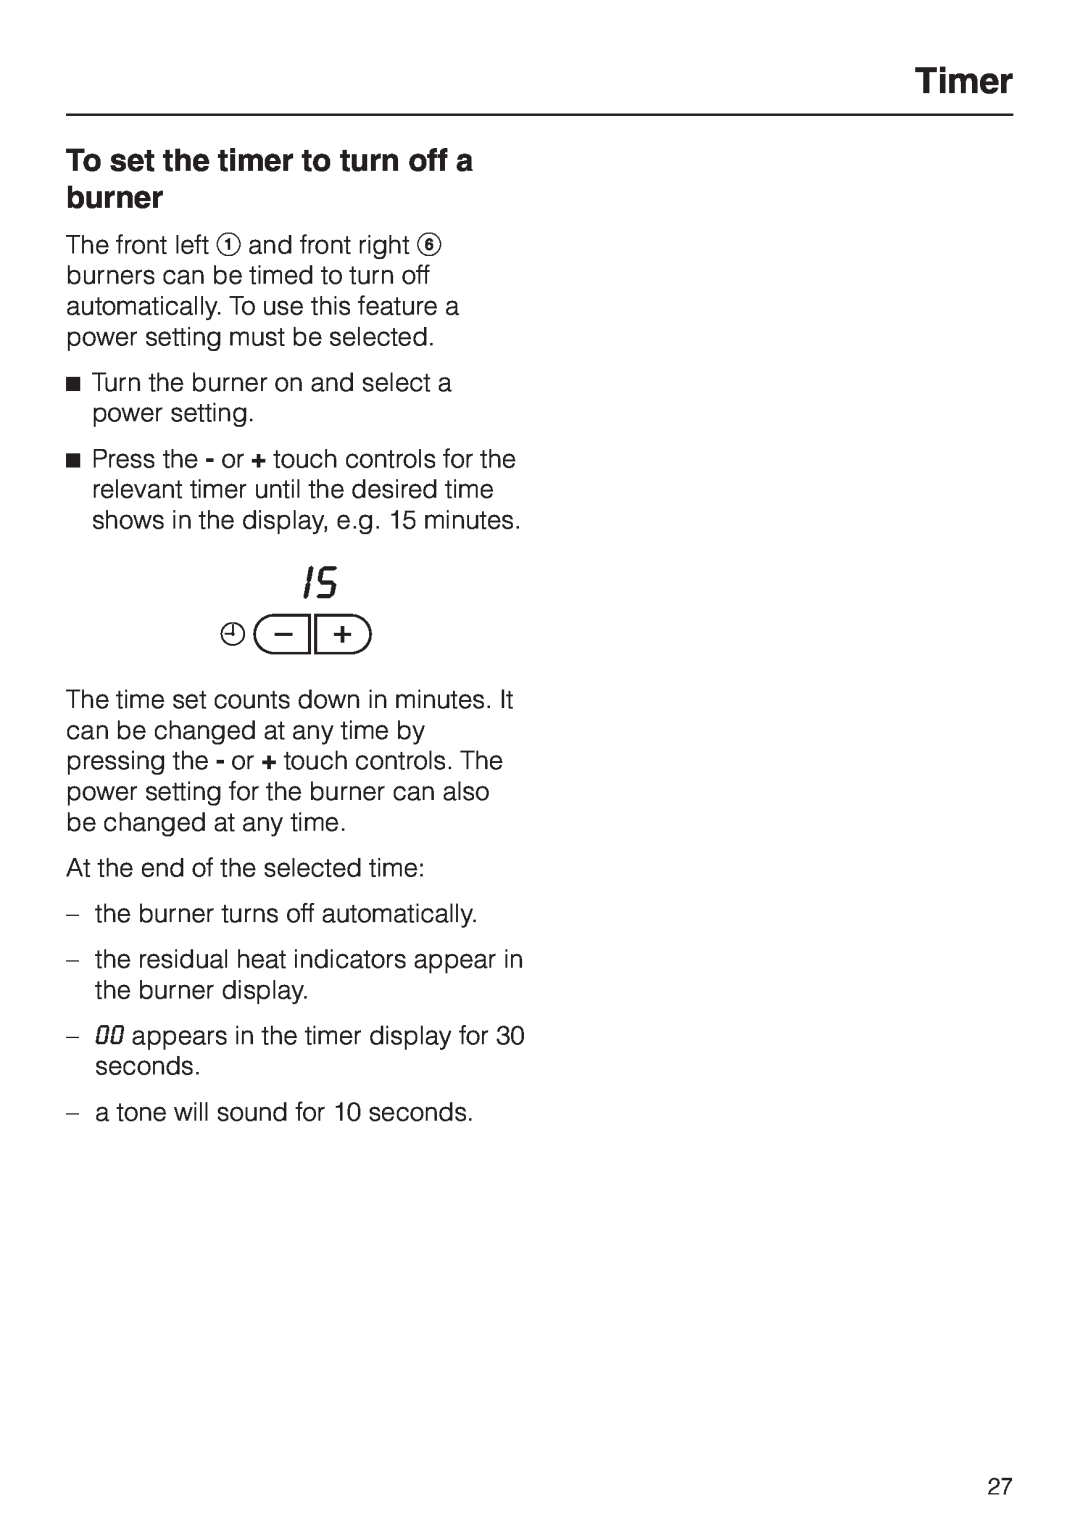 Miele KM 452 manual To set the timer to turn off a burner, Timer 